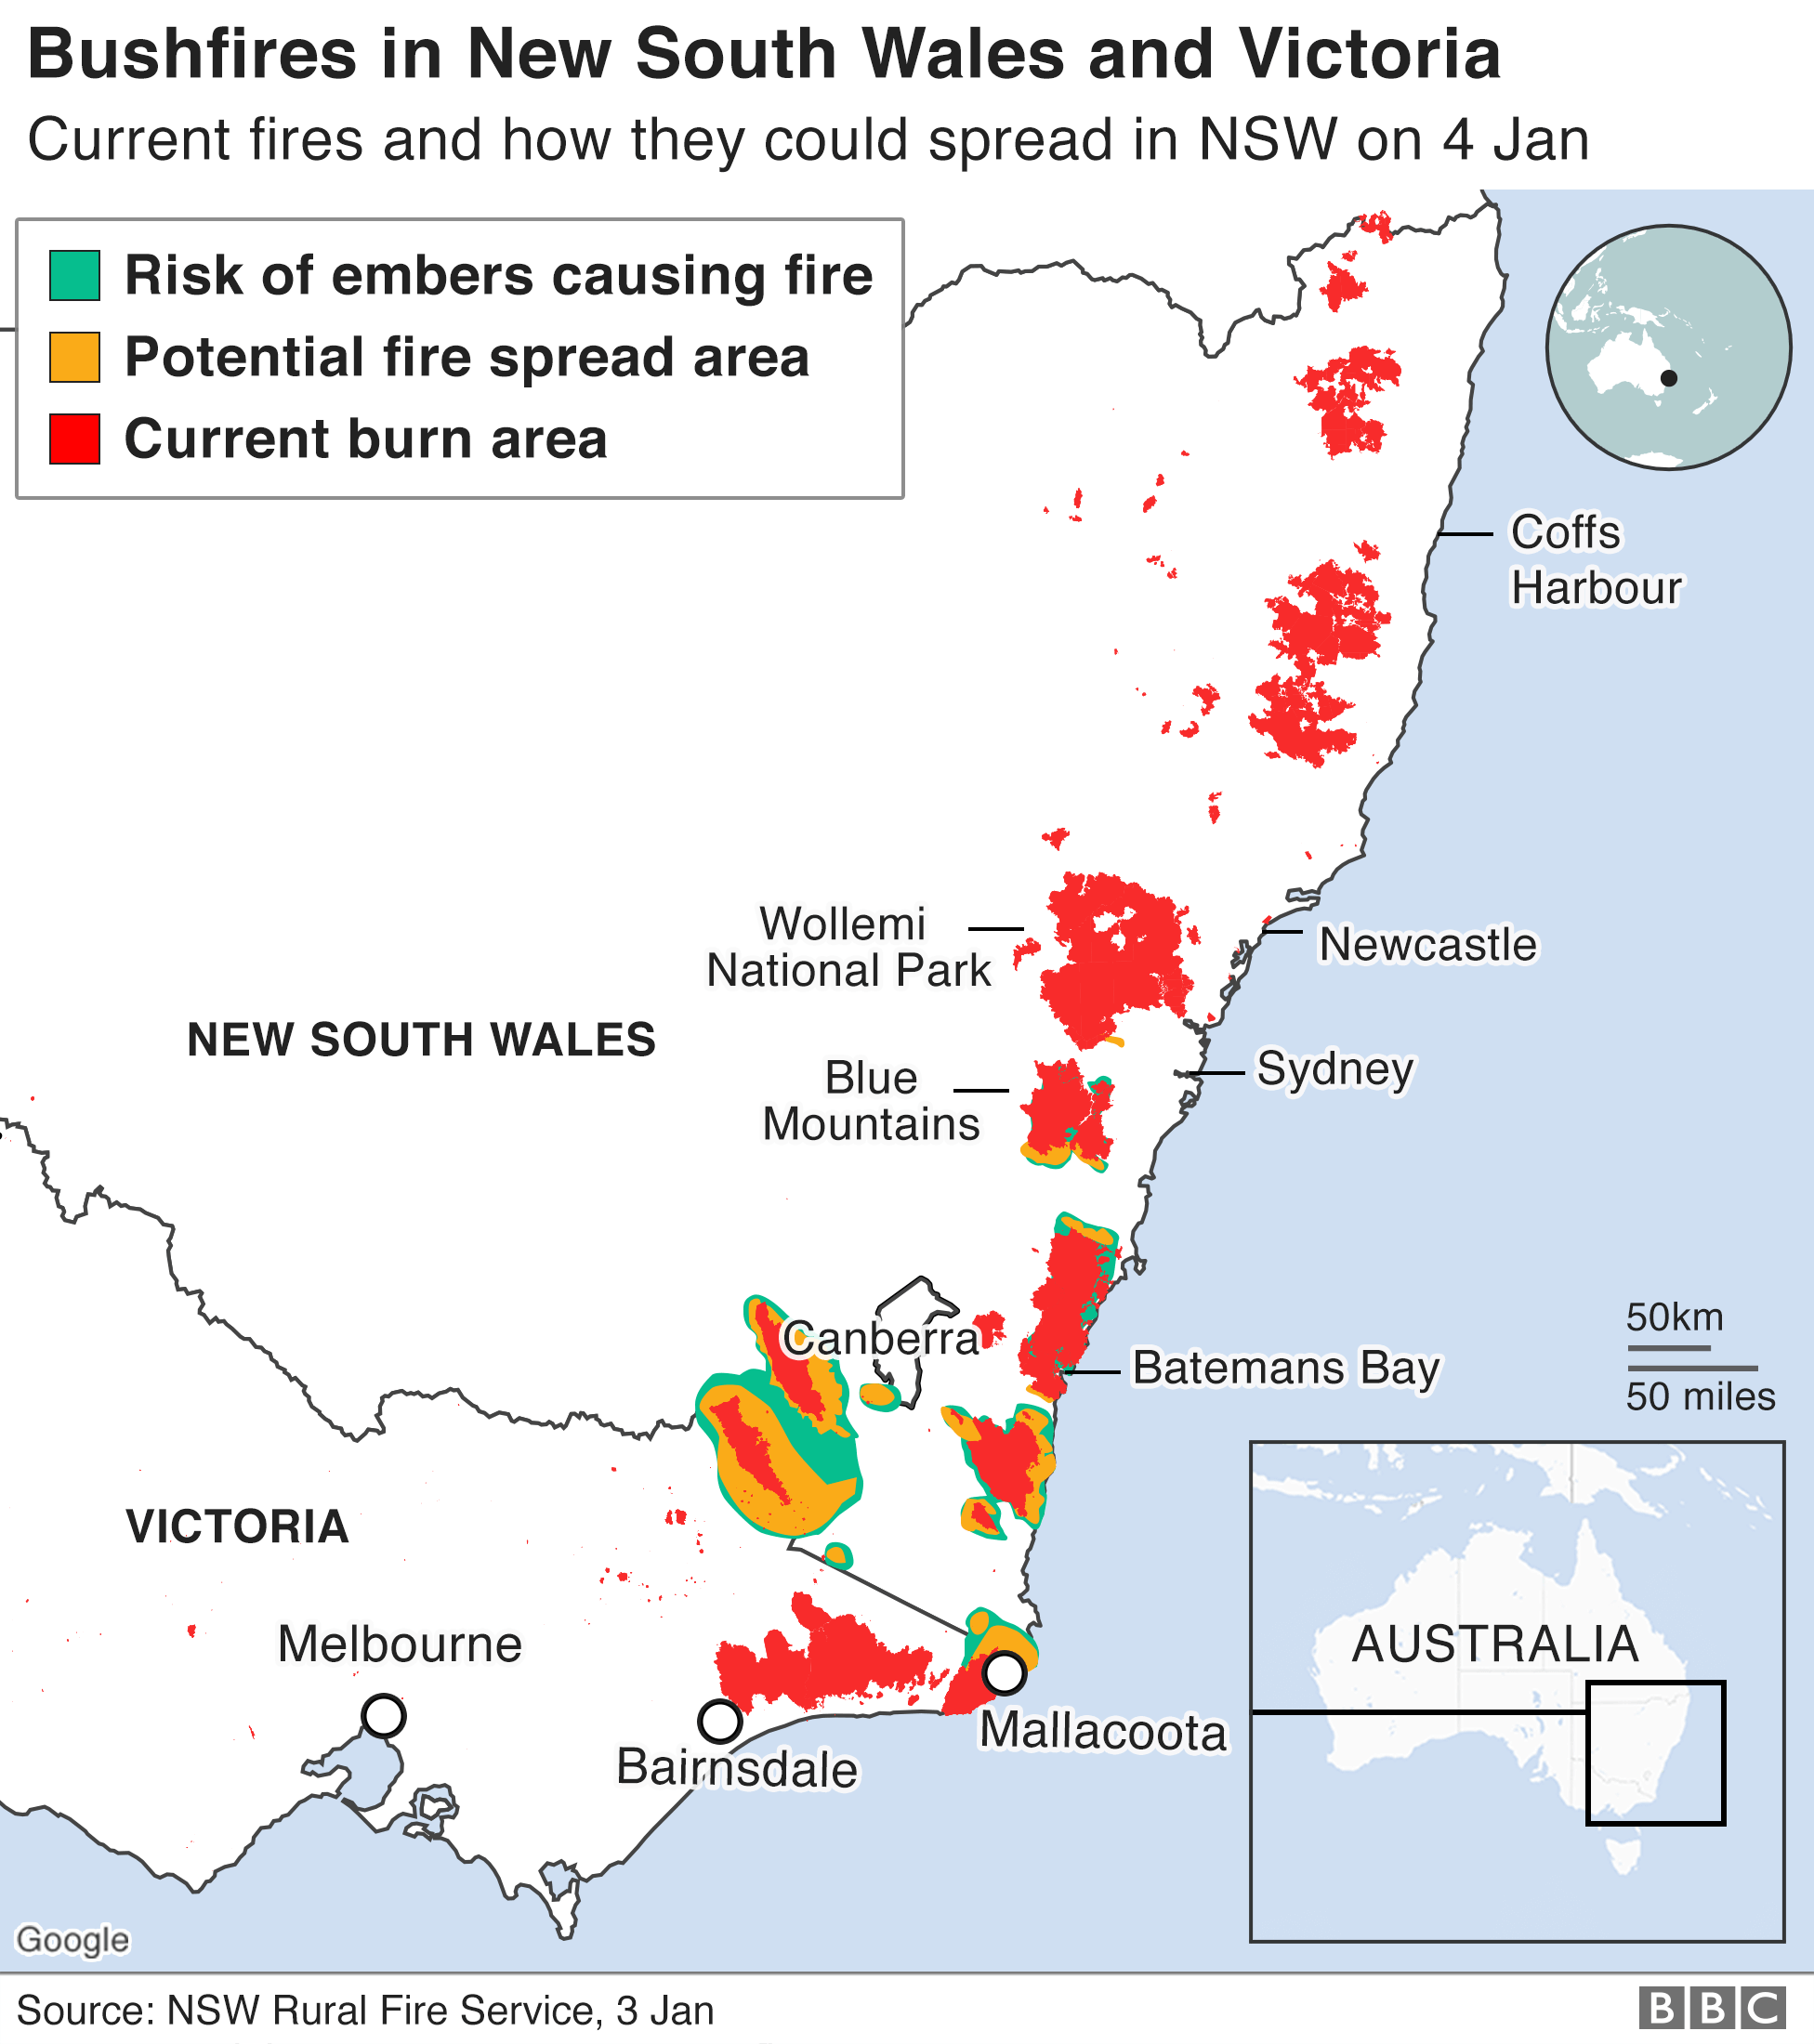 Graphic: possible spread of fires in NSW